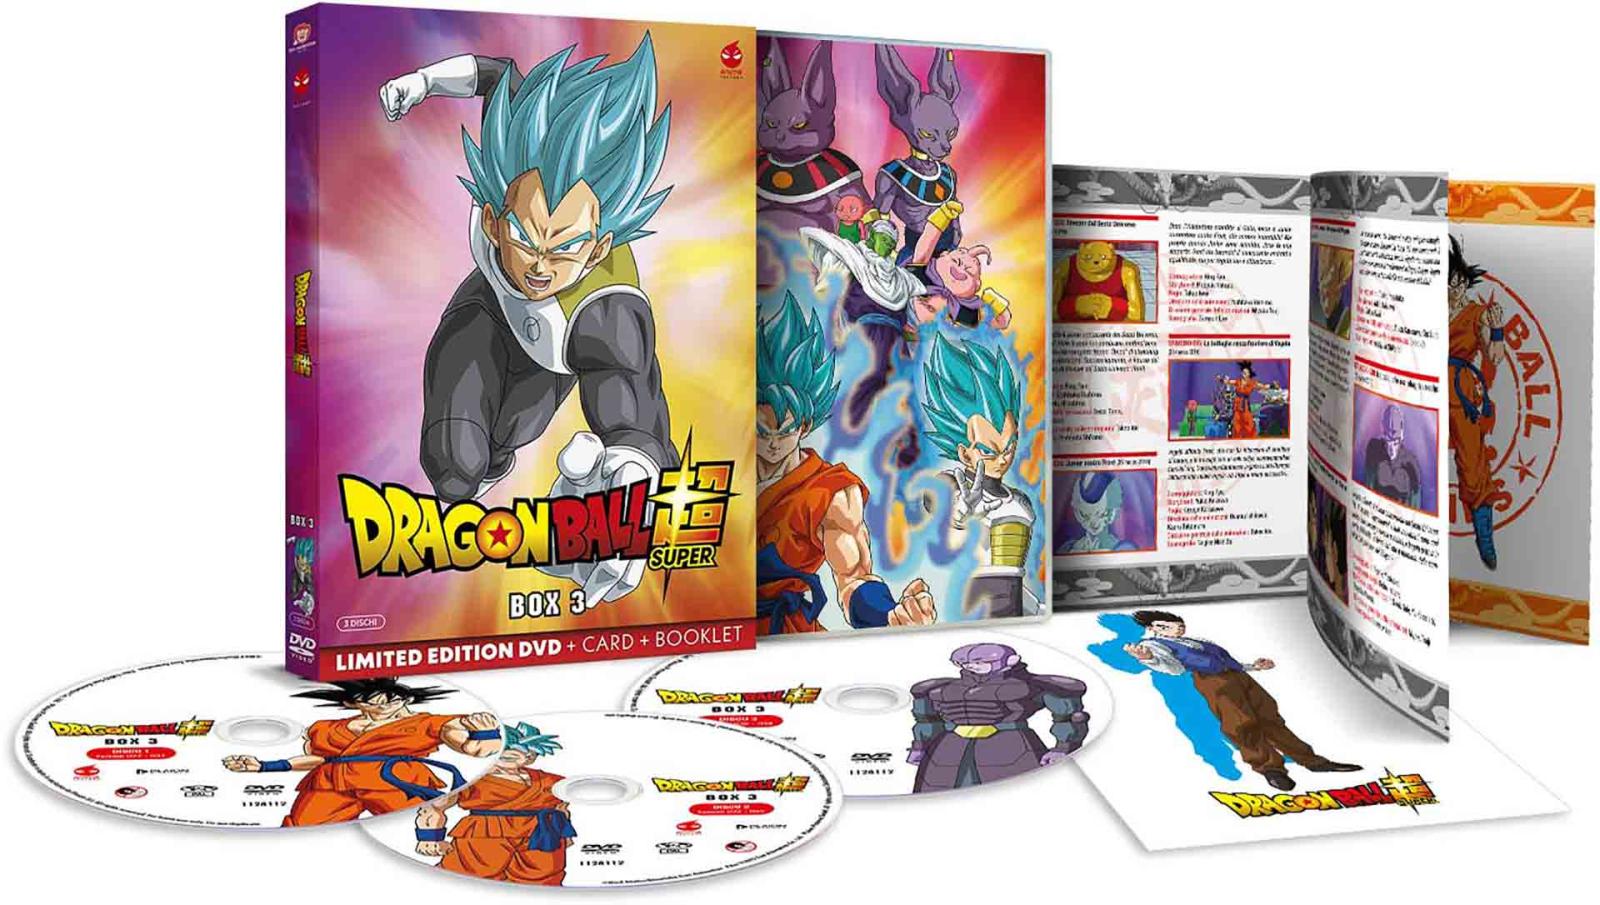 Dragon Ball Super - Volume 3 - Limited Edition 3 DVD + Card + Booklet (DVD) Image 2